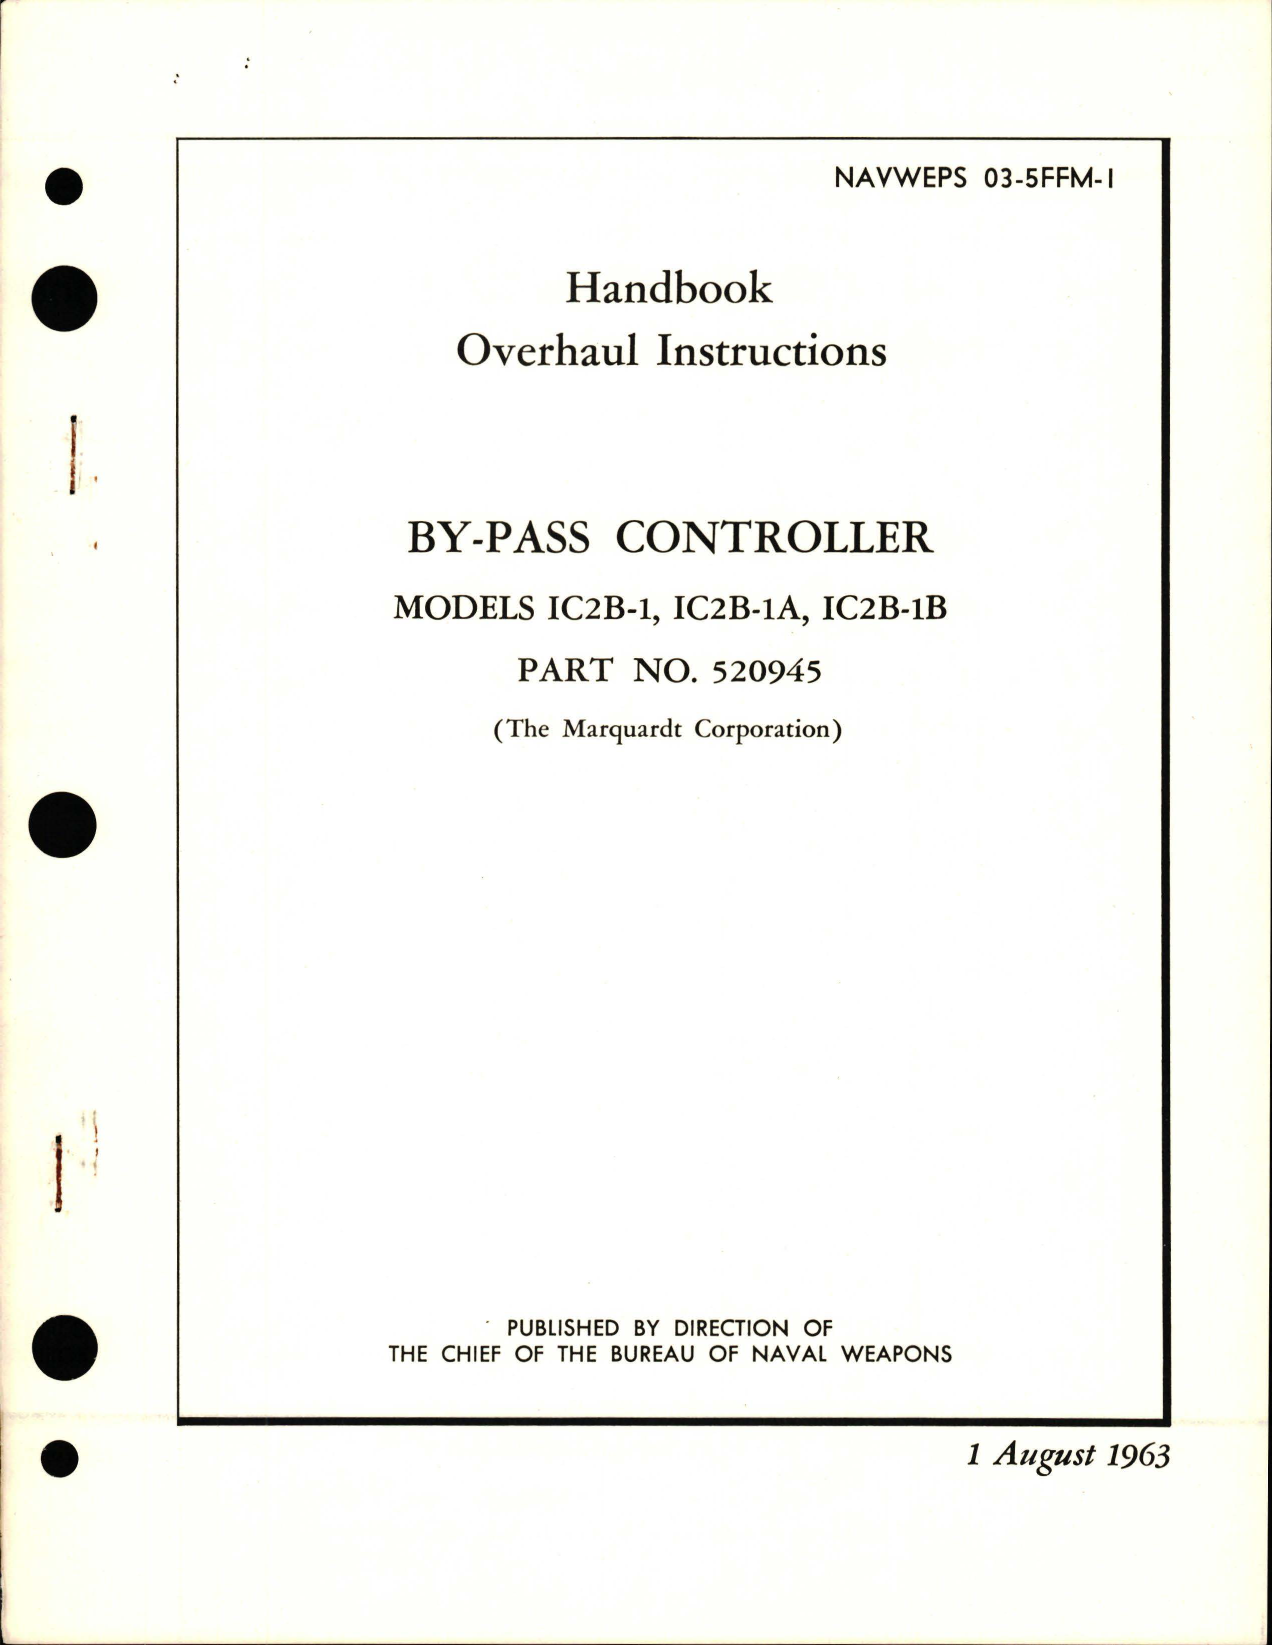 Sample page 1 from AirCorps Library document: Overhaul Instructions for By-Pass Controller - Models IC2B-1, IC2B-1A, and IC2B-1B - Part 520945